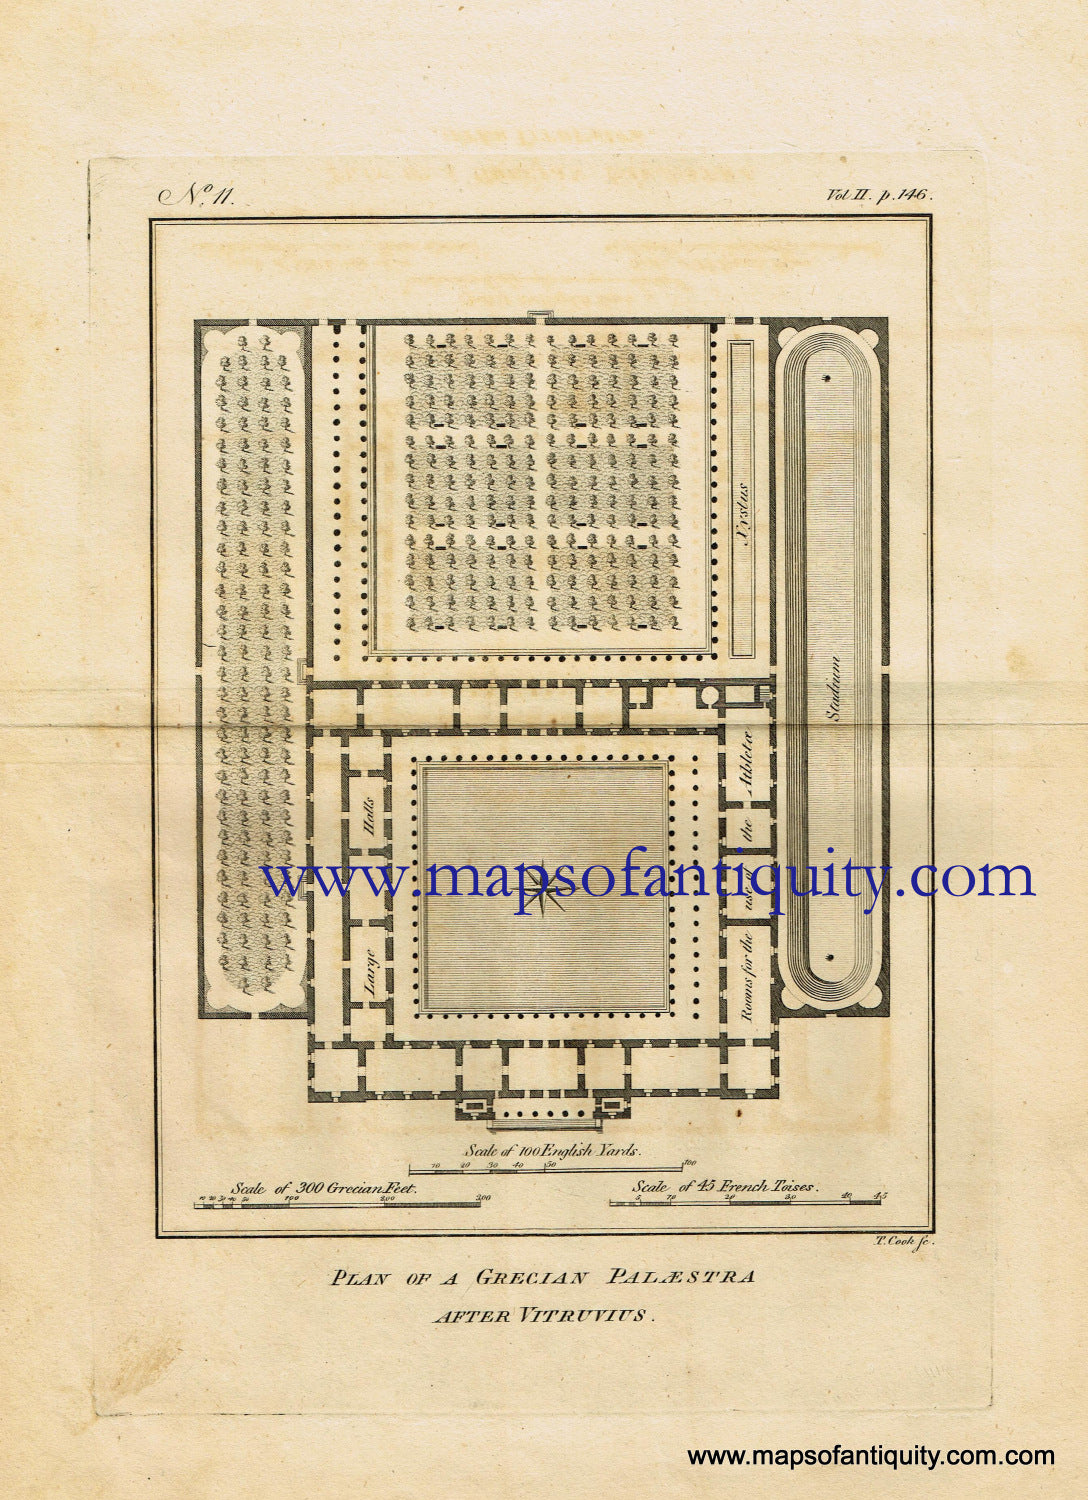 Antique-Black-and-White-Print-Plan-of-a-Grecian-Palaestra-After-Vitruvius-Greece-Europe-Greece-1791-Barbie-du-Bocage-Maps-Of-Antiquity